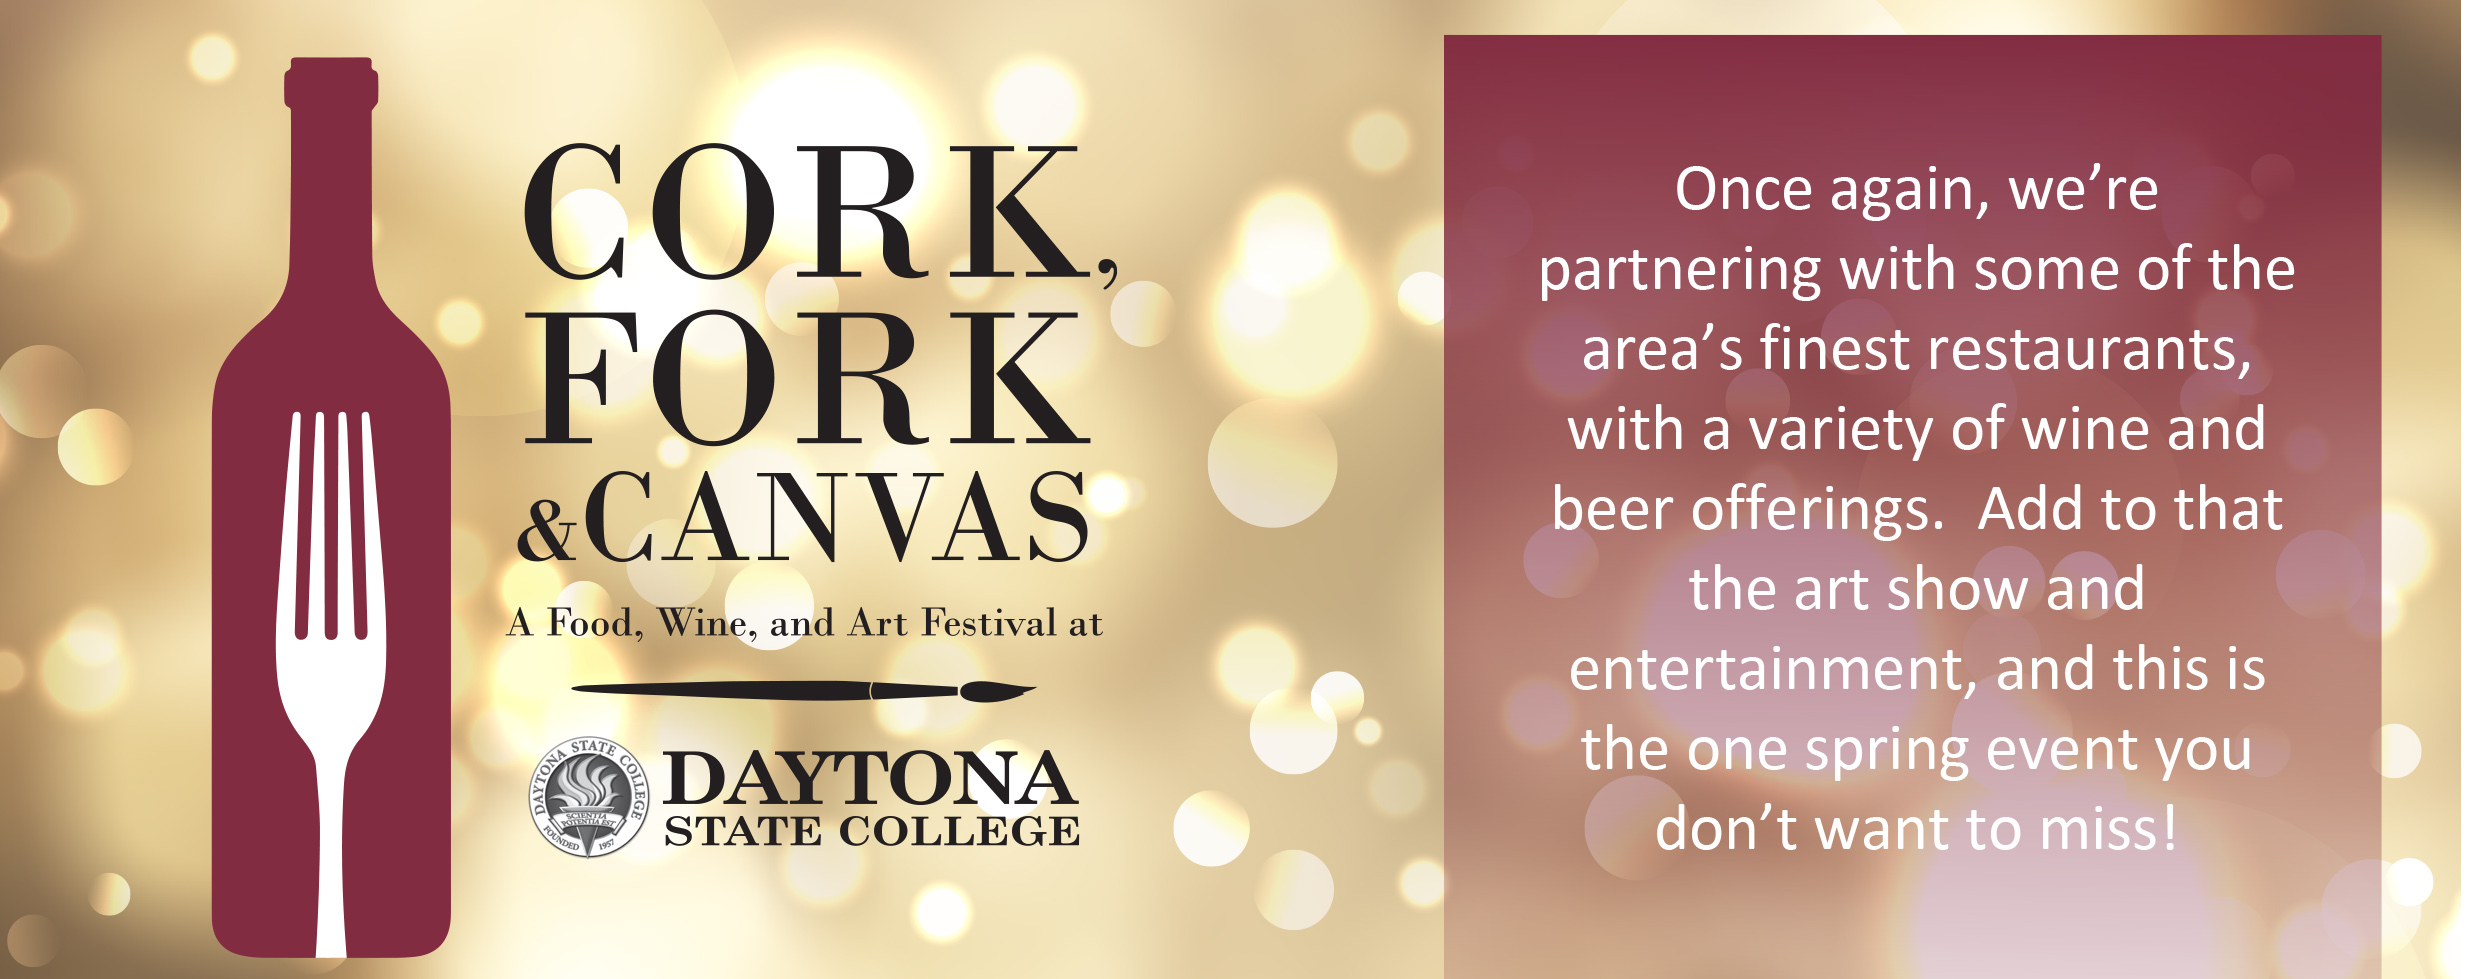 Once again, we’re partnering with some of the area’s finest restaurants, and offering a variety of wine and beer. Add to that an art show and entertainment, and this is the one spring event you don’t want to miss!